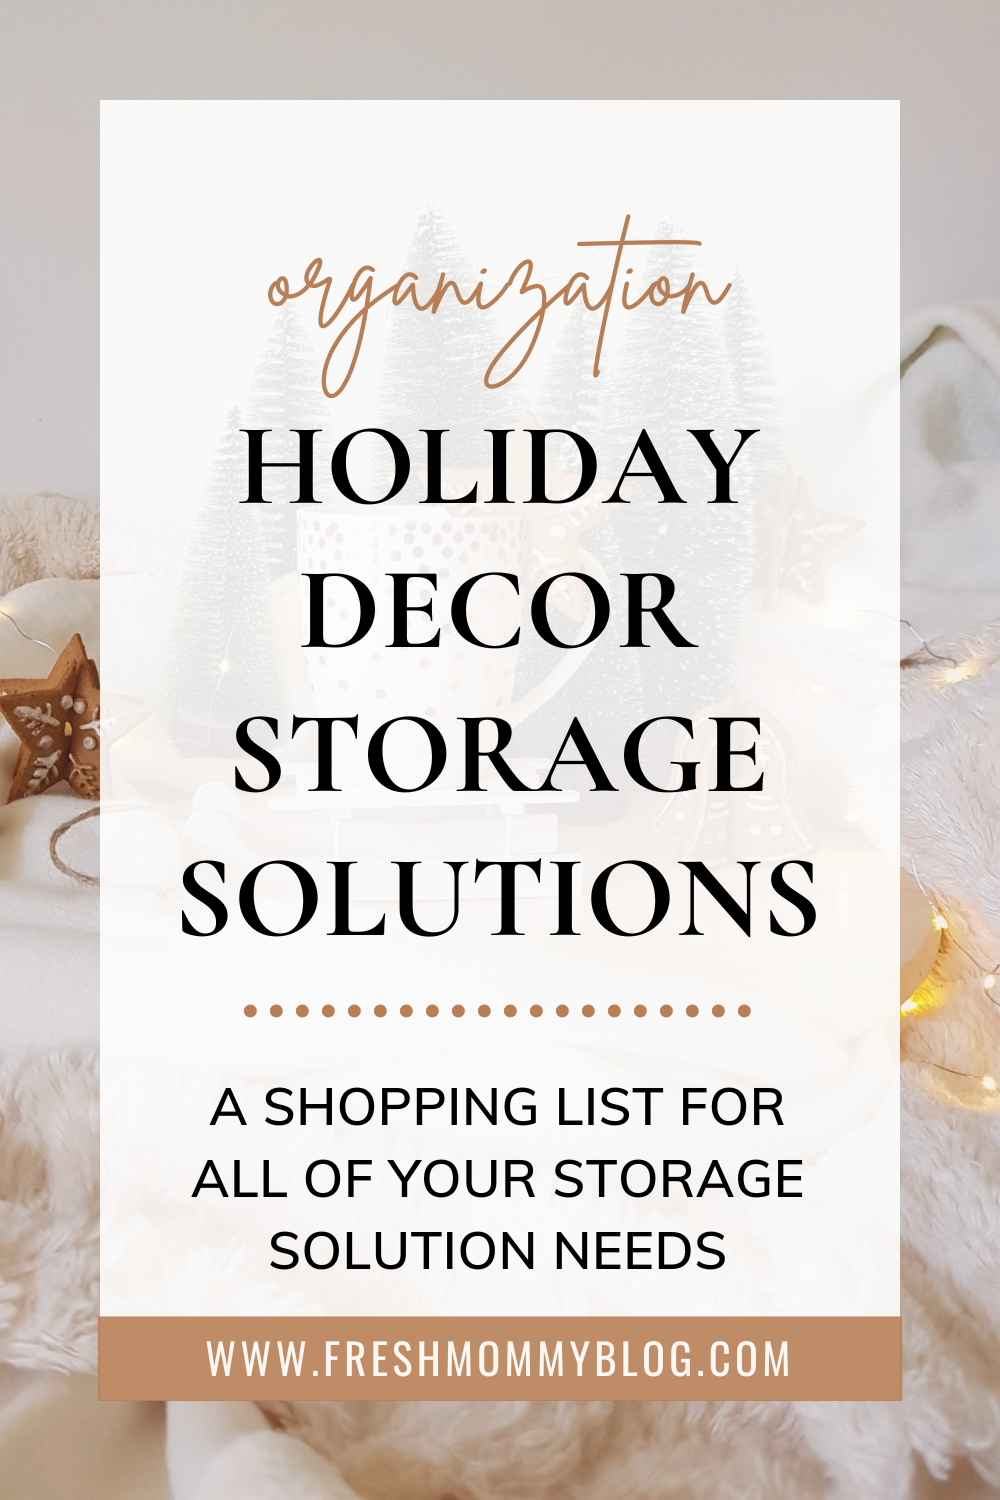 Organization tips for all of your holiday decor. A shopping list for all of your storage solution needs.